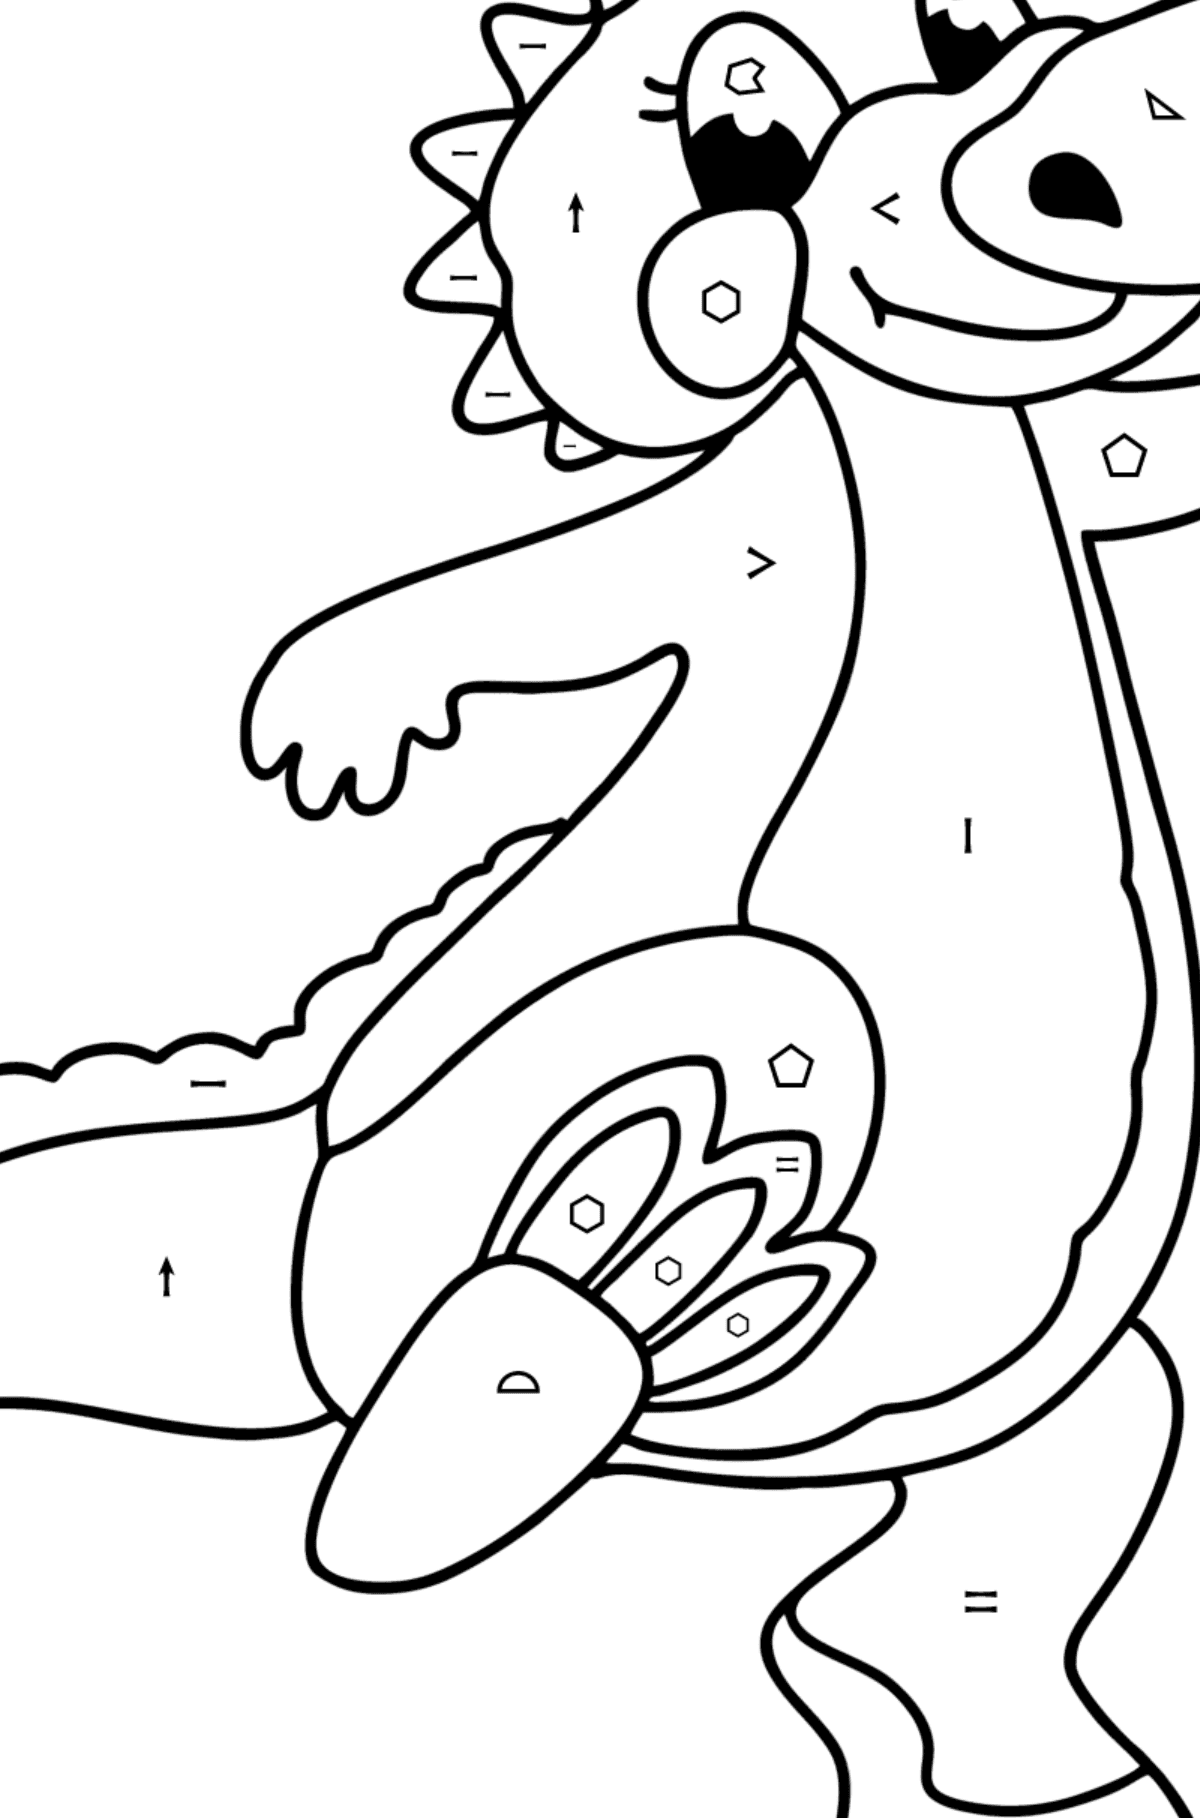 Happy dragon baby coloring page - Coloring by Symbols and Geometric Shapes for Kids